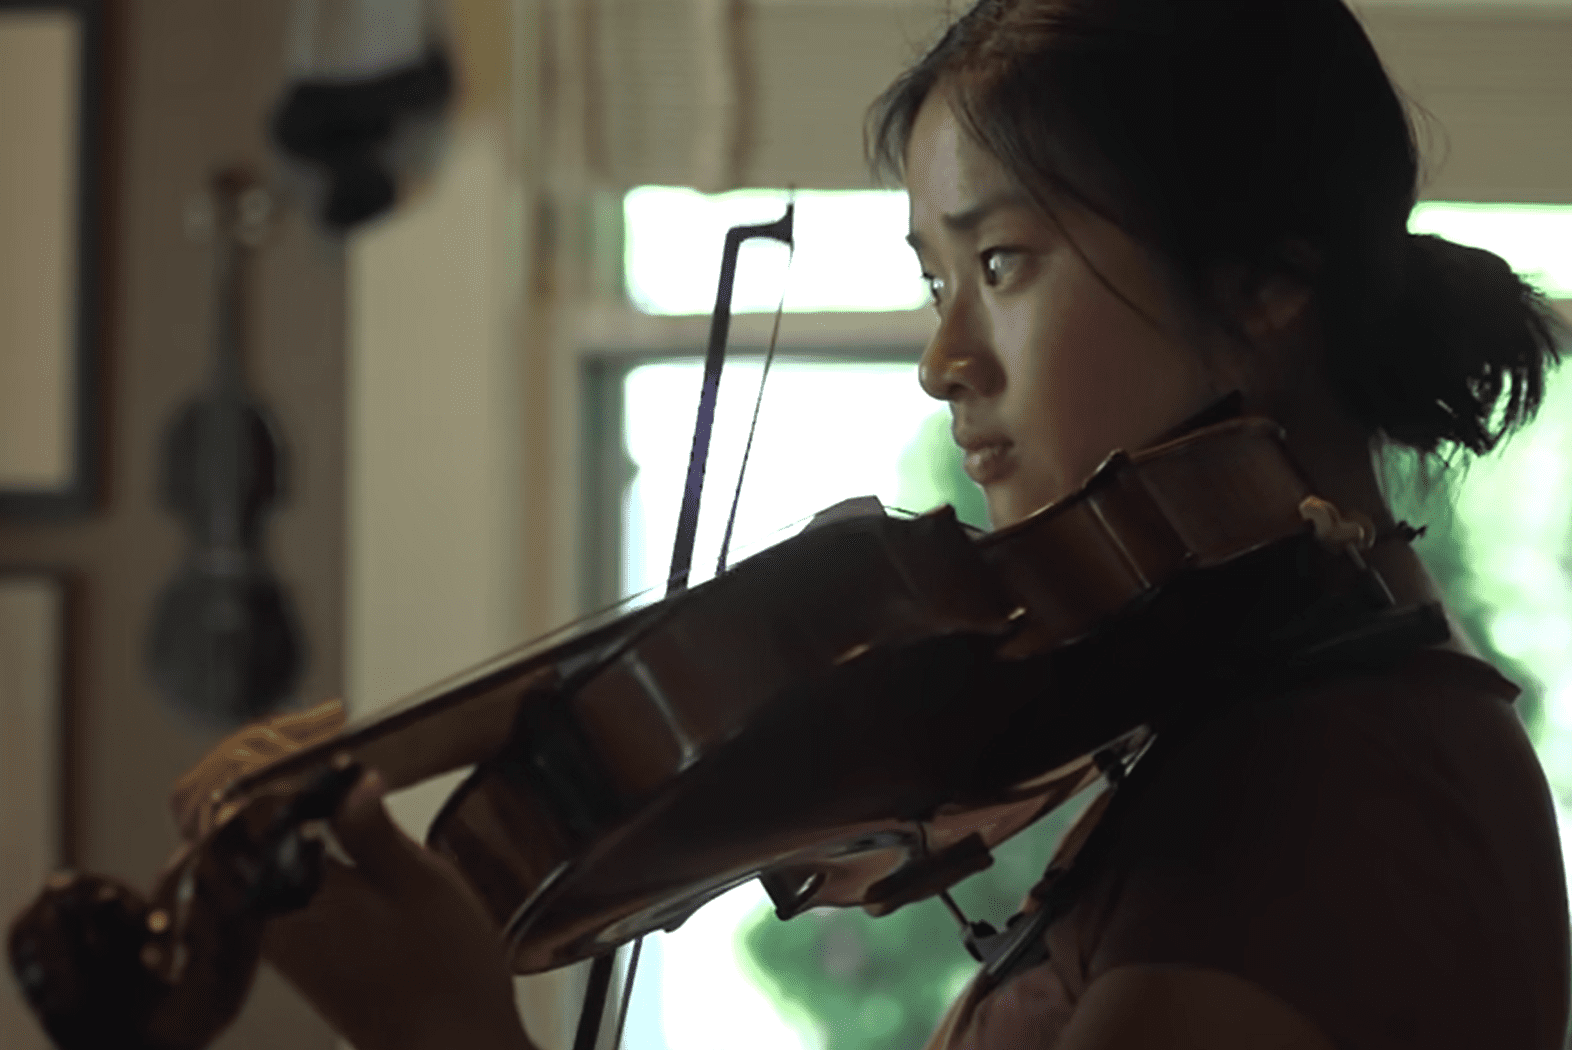  Kati Pohler playing a violin. | Source: youtube.com/BBC Stories 